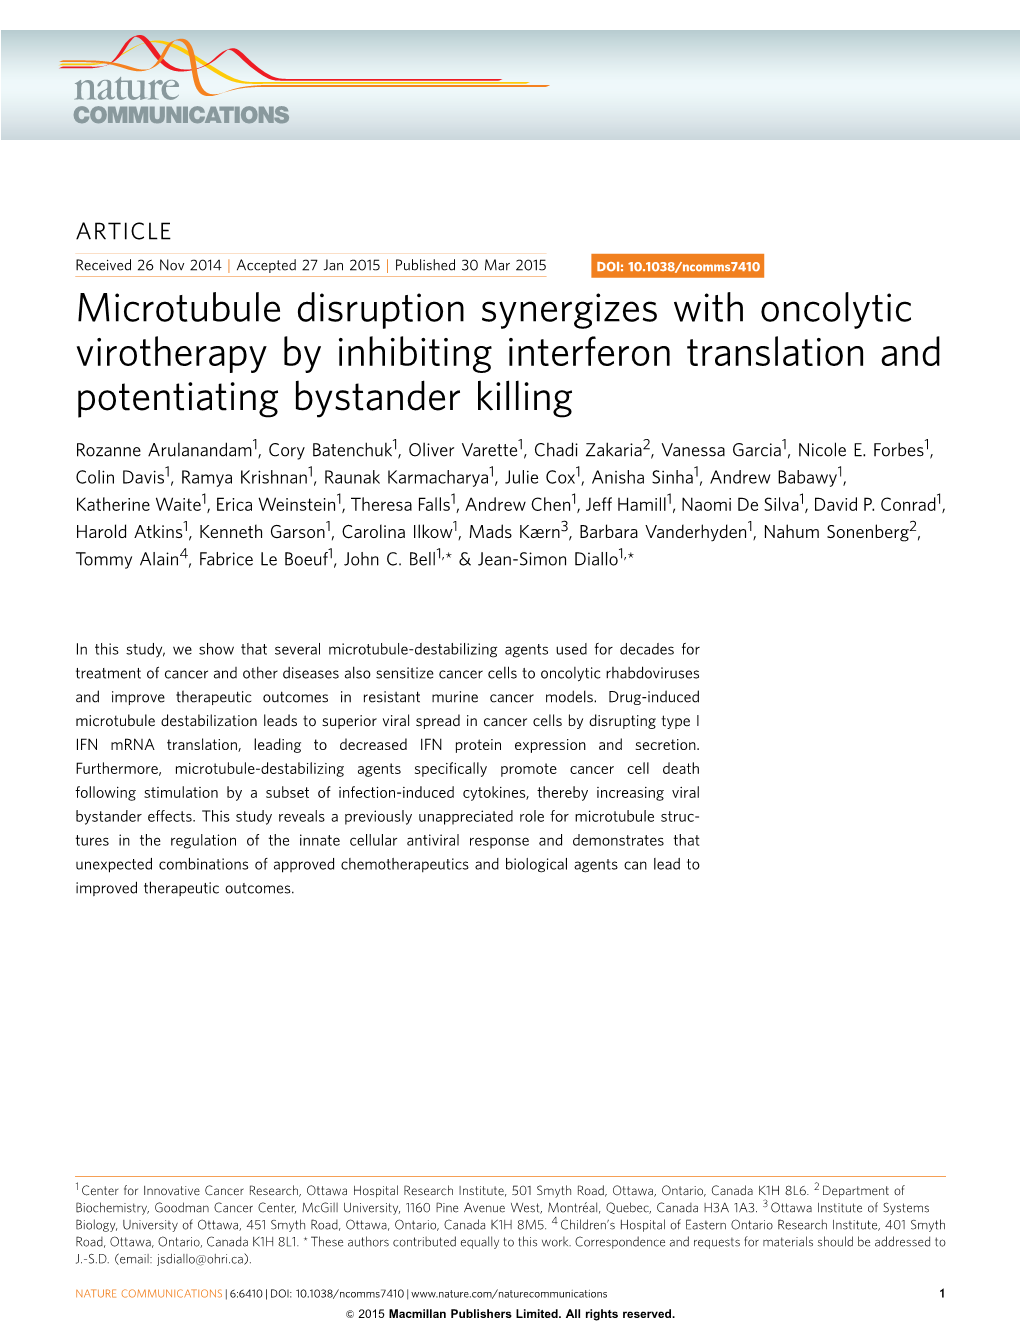 Microtubule Disruption Synergizes with Oncolytic Virotherapy by Inhibiting Interferon Translation and Potentiating Bystander Killing